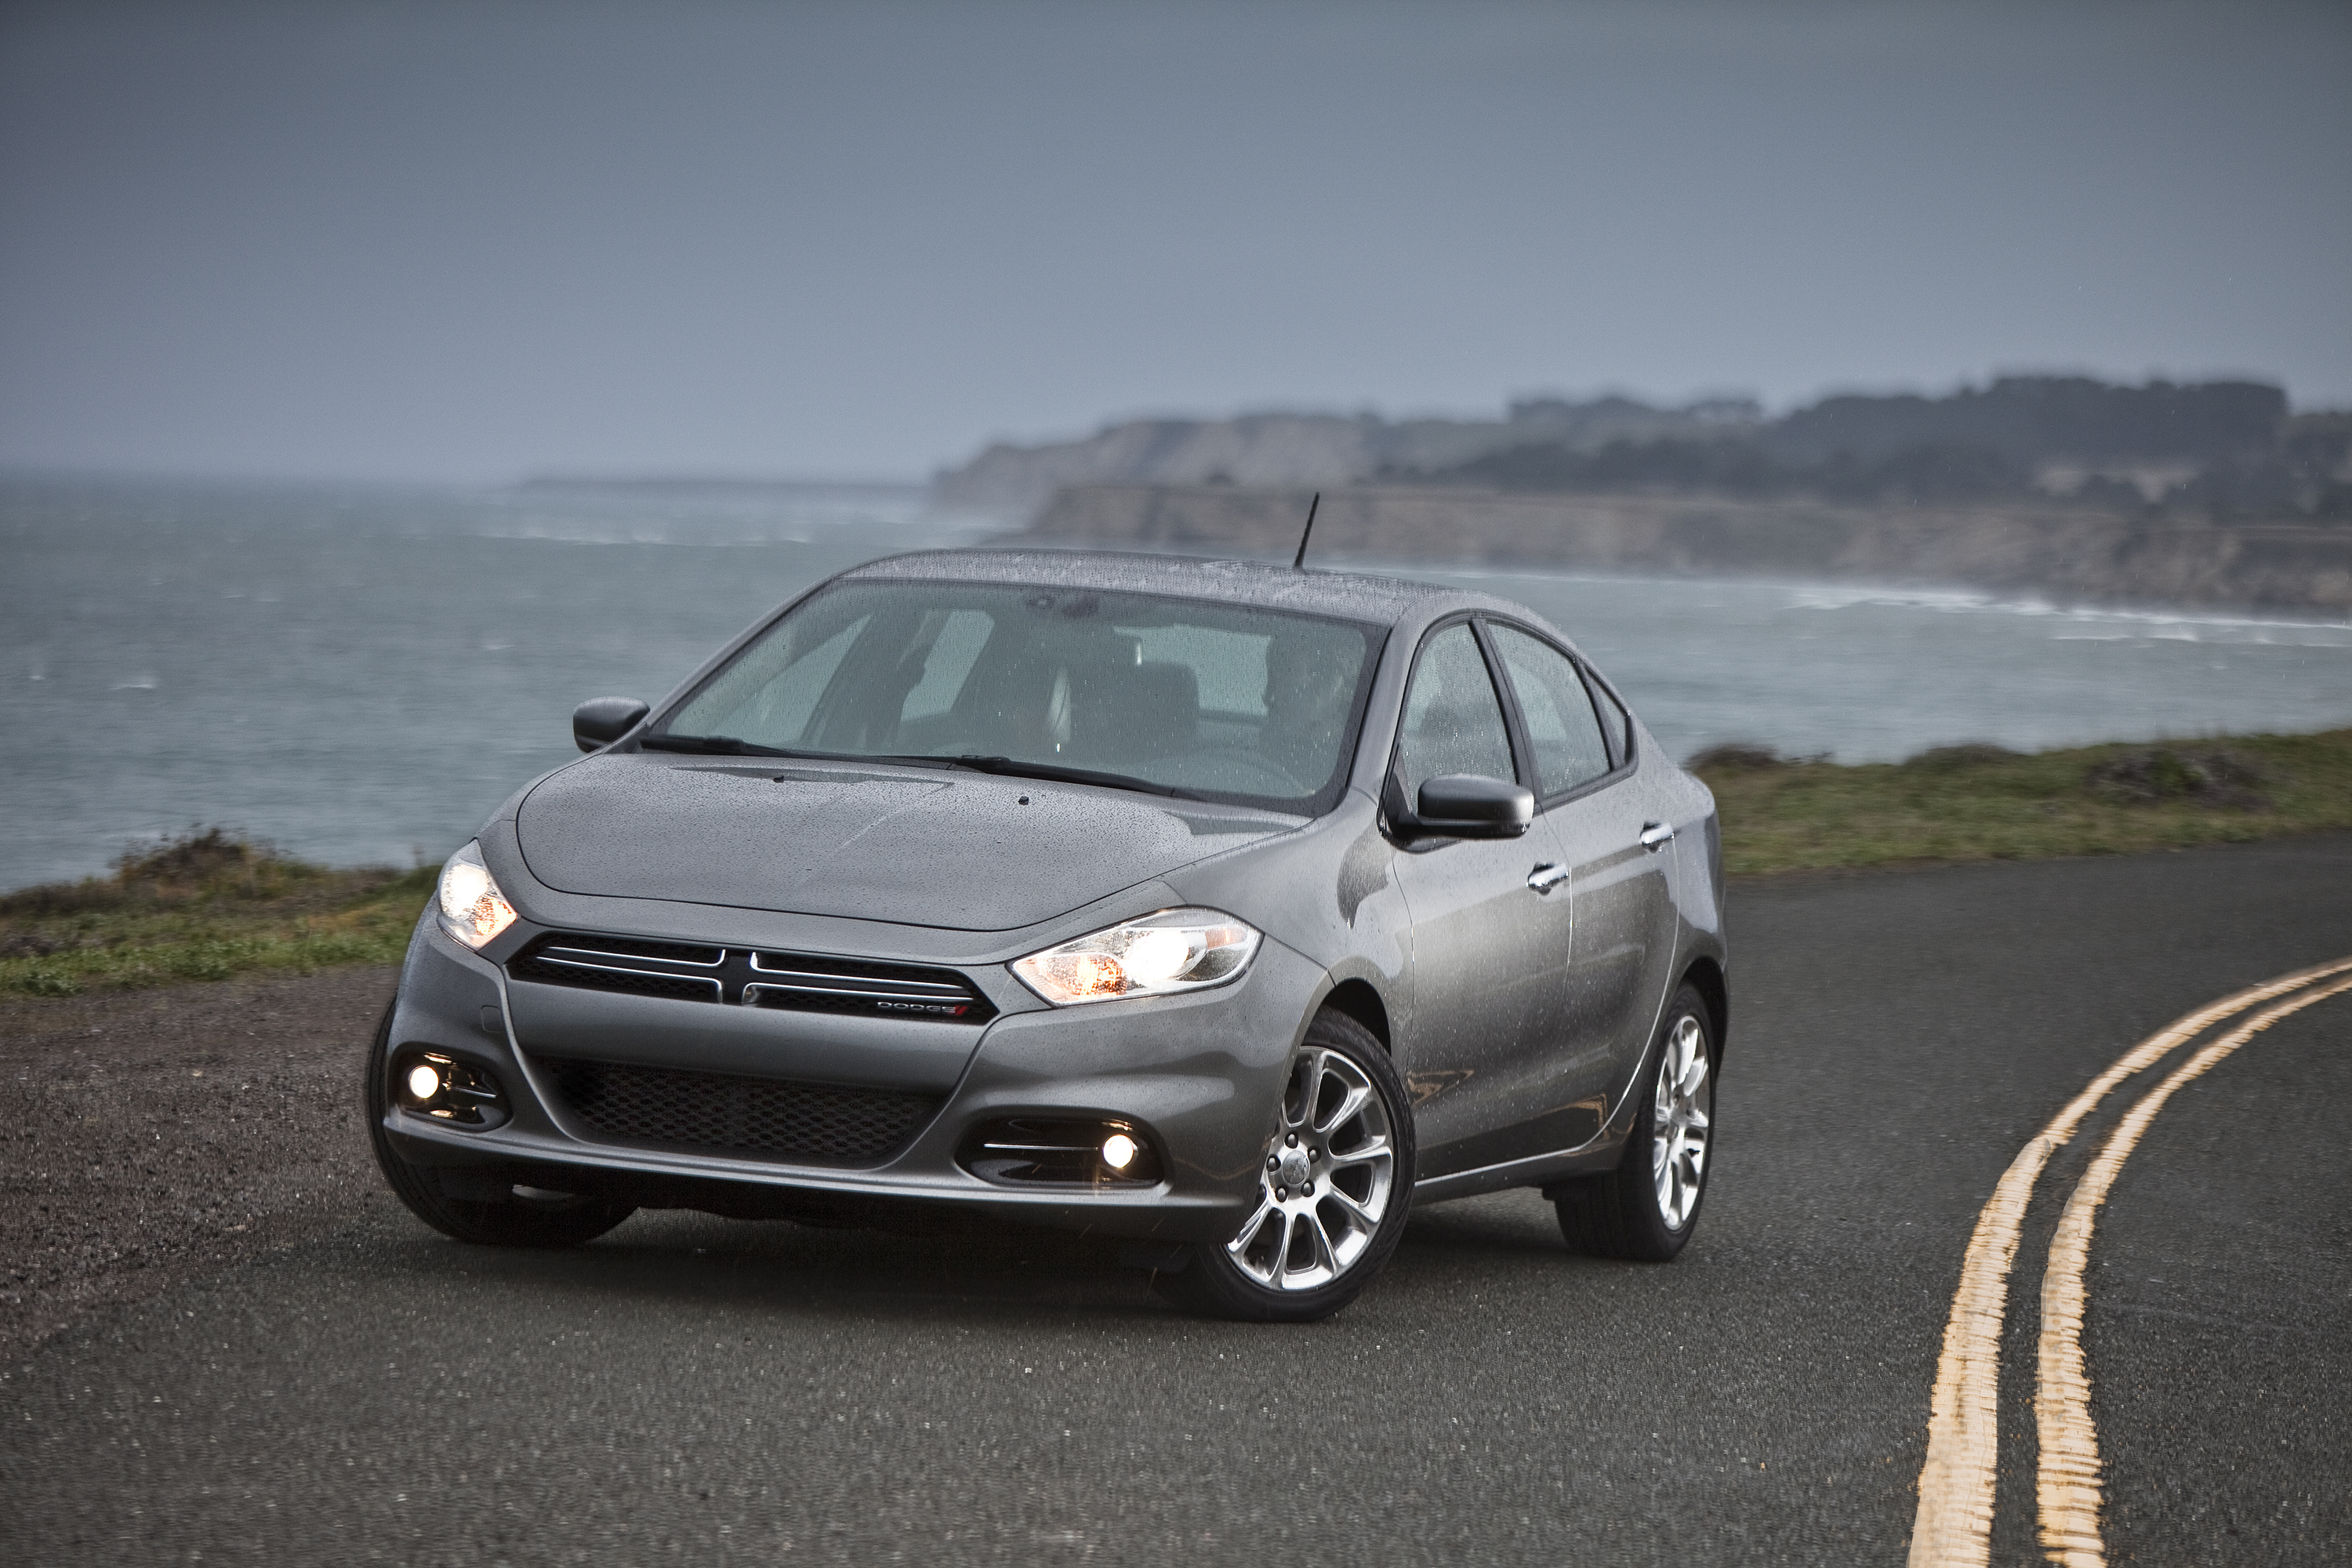 FCA to discontinue Chrysler 200, Dodge Dart, focus on utilities moving forward